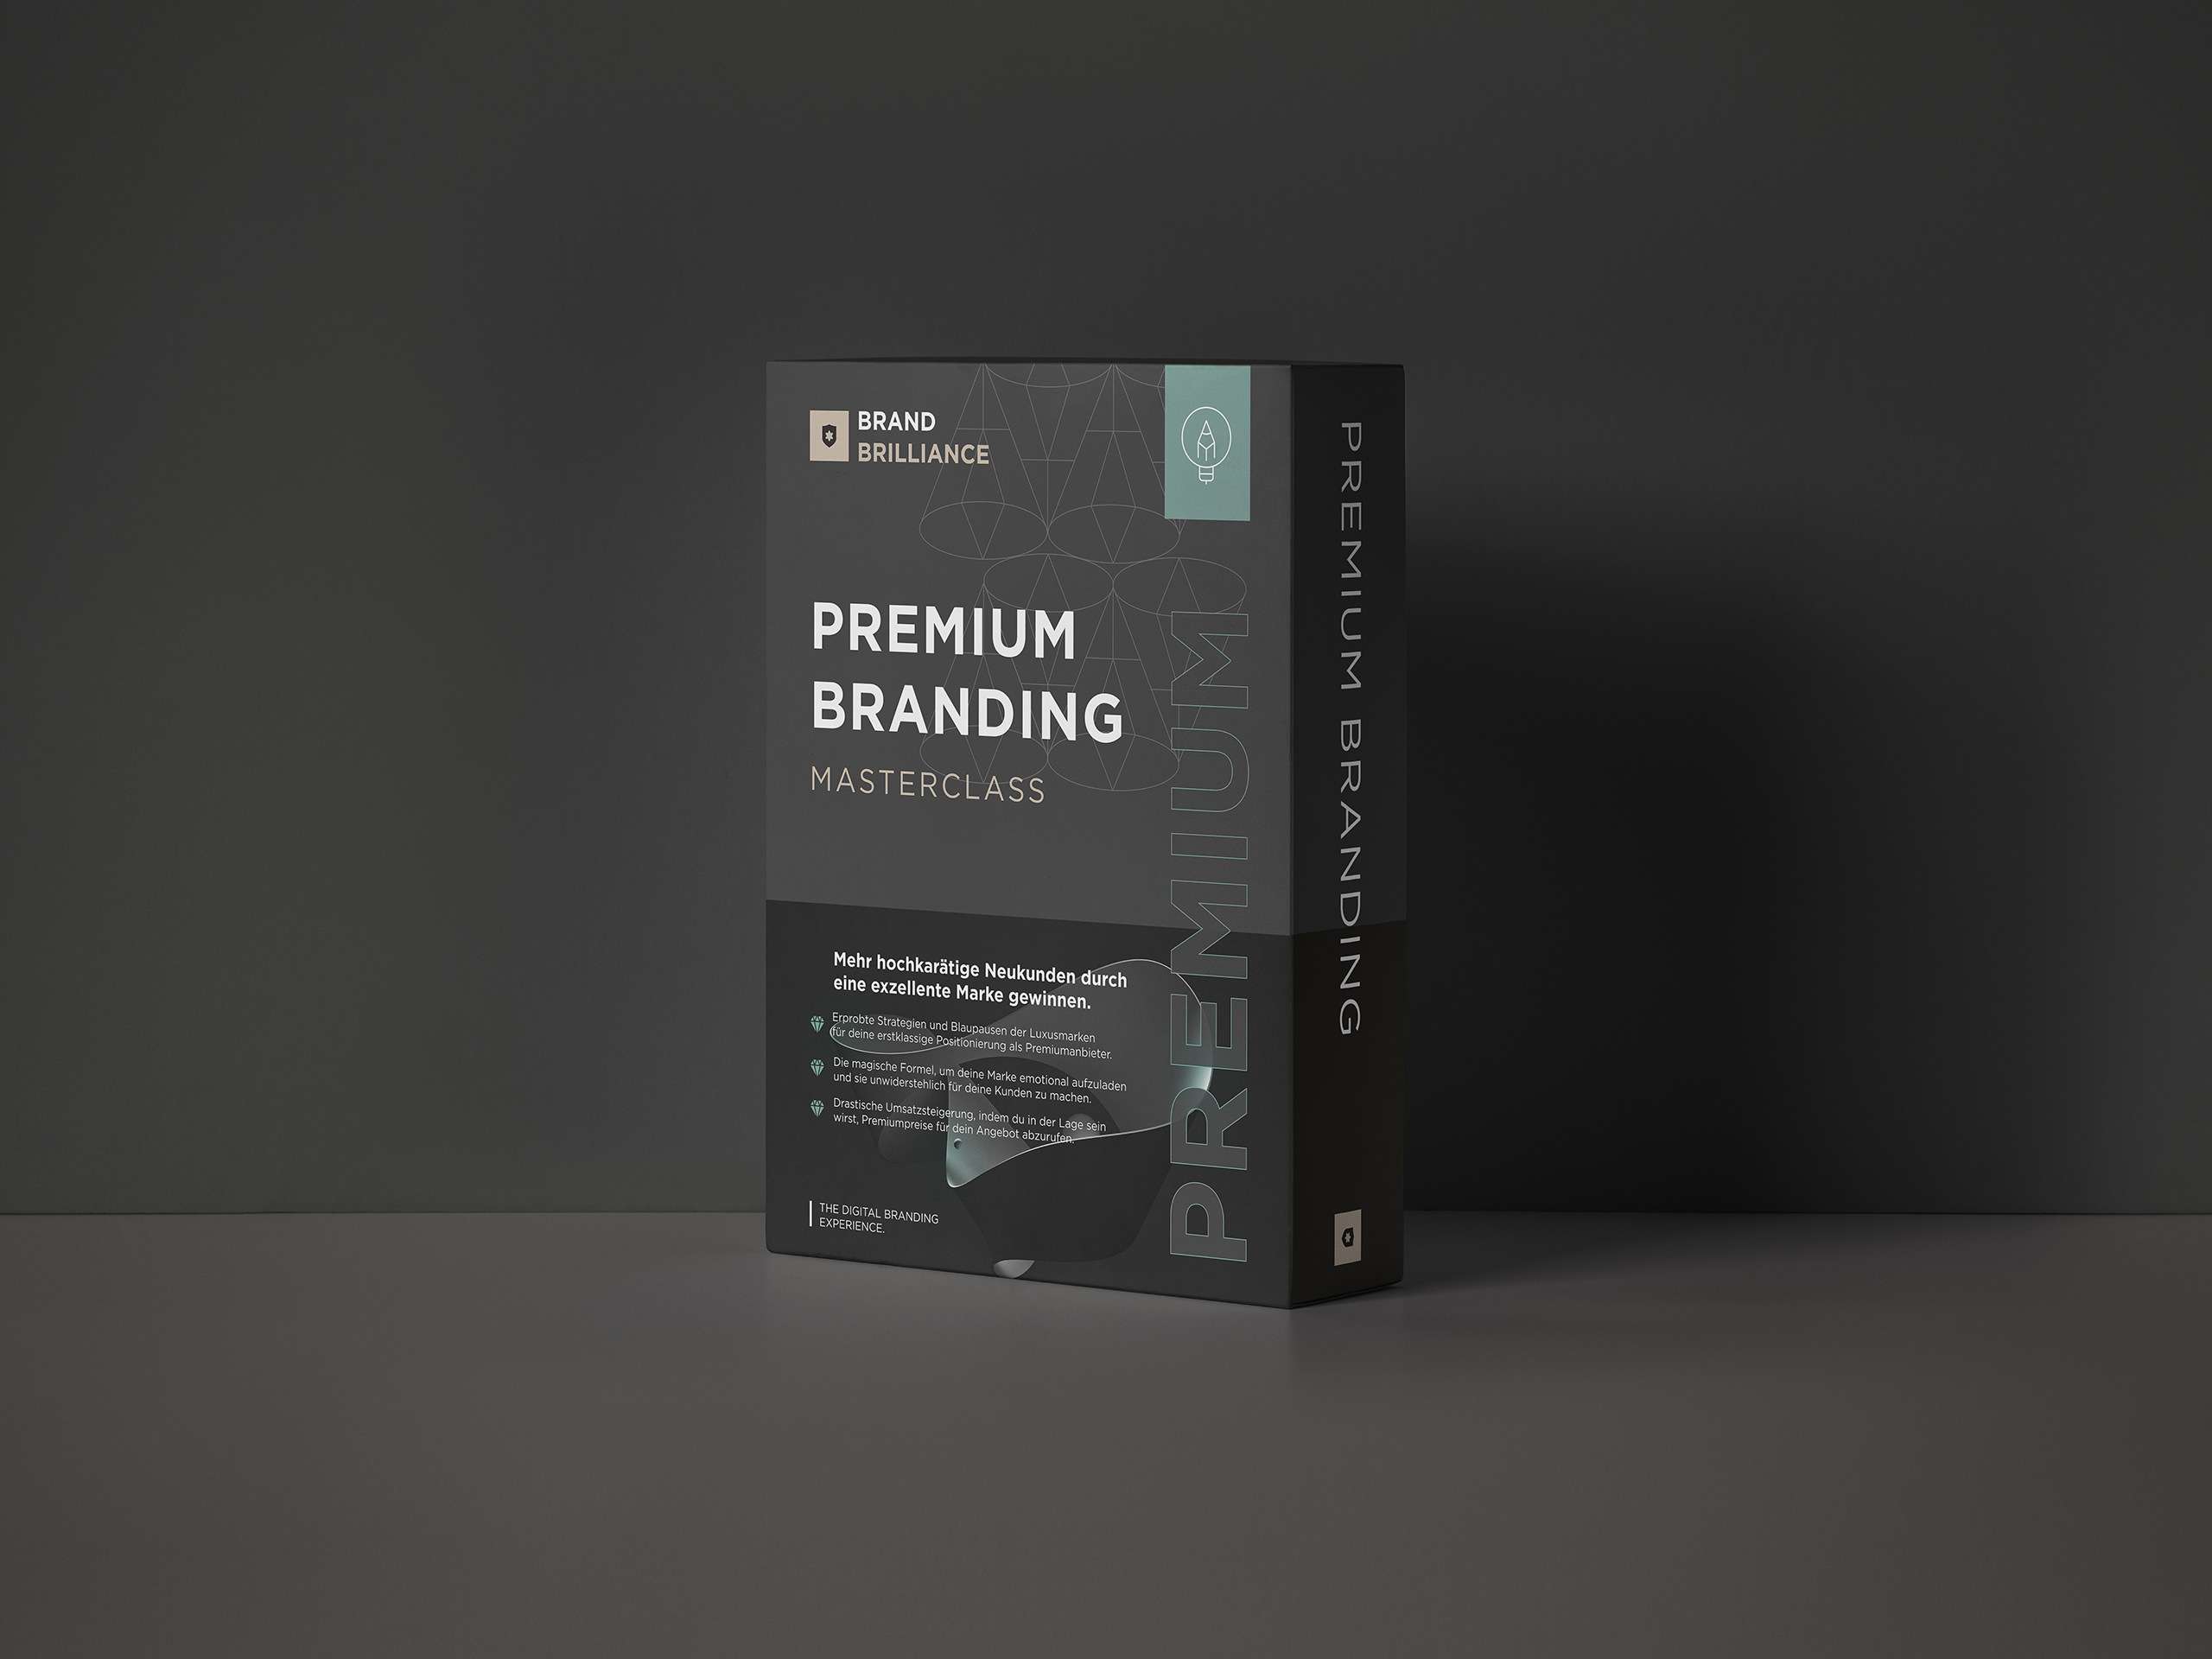 Premium Branding Masterclass: The exclusive premium branding course for entrepreneurs, service providers, agencies, and consultants serves as your digital blueprint, with which you will be able to position yourself as a premium provider, emotionally charge your brand, and become irresistible to your customers.